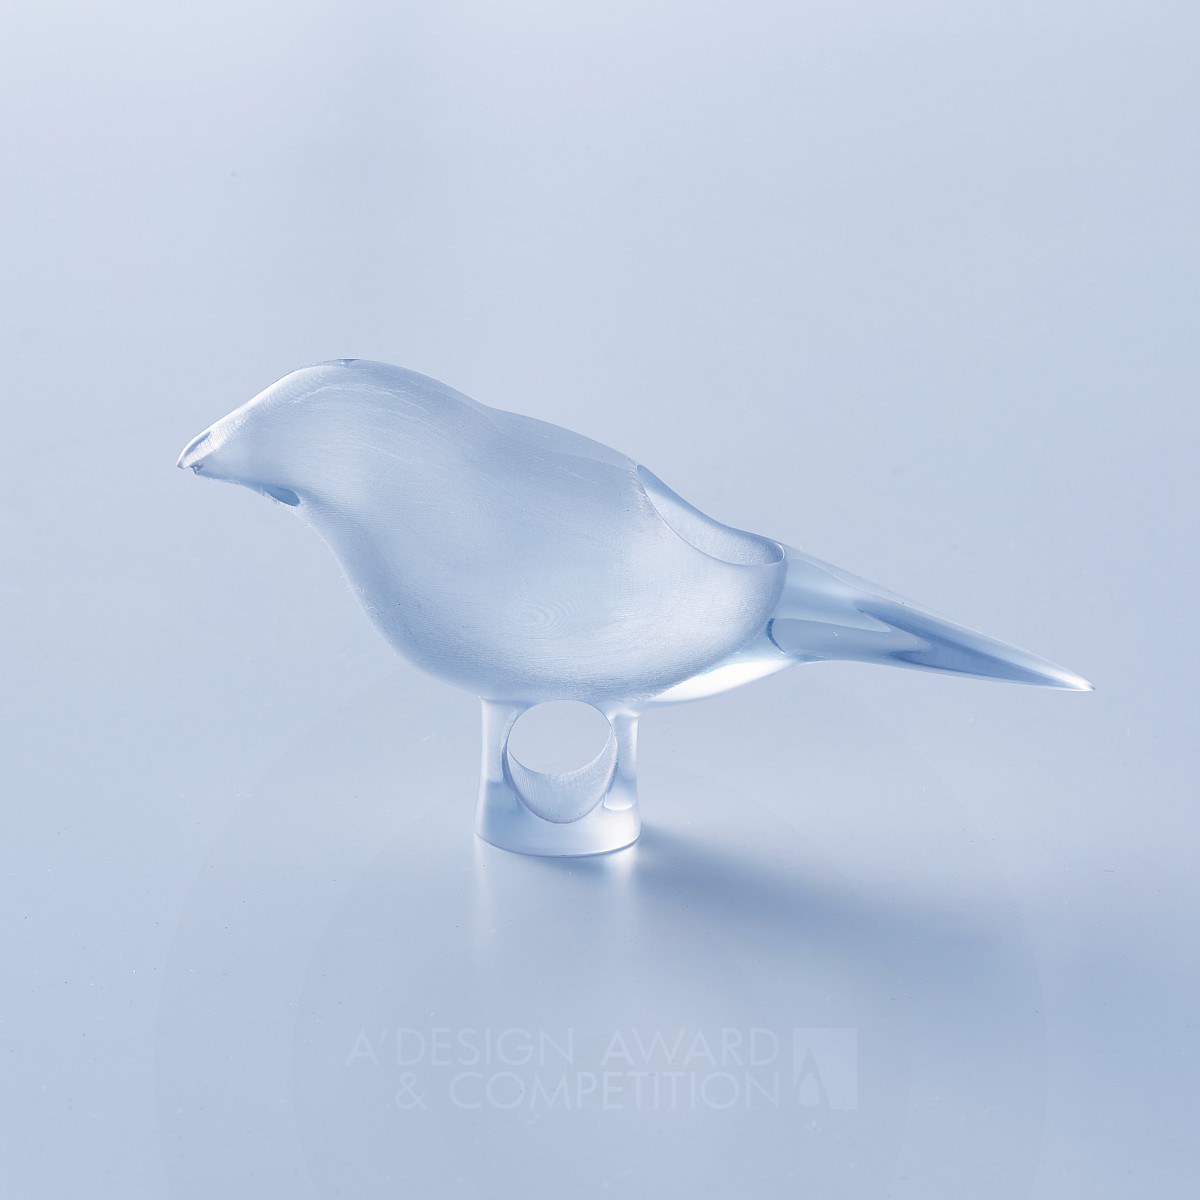 Bird's Sake Cup Cup to Refrain from Drinking by Kenji Fujii Silver 3D Printed Forms and Products Design Award Winner 2020 